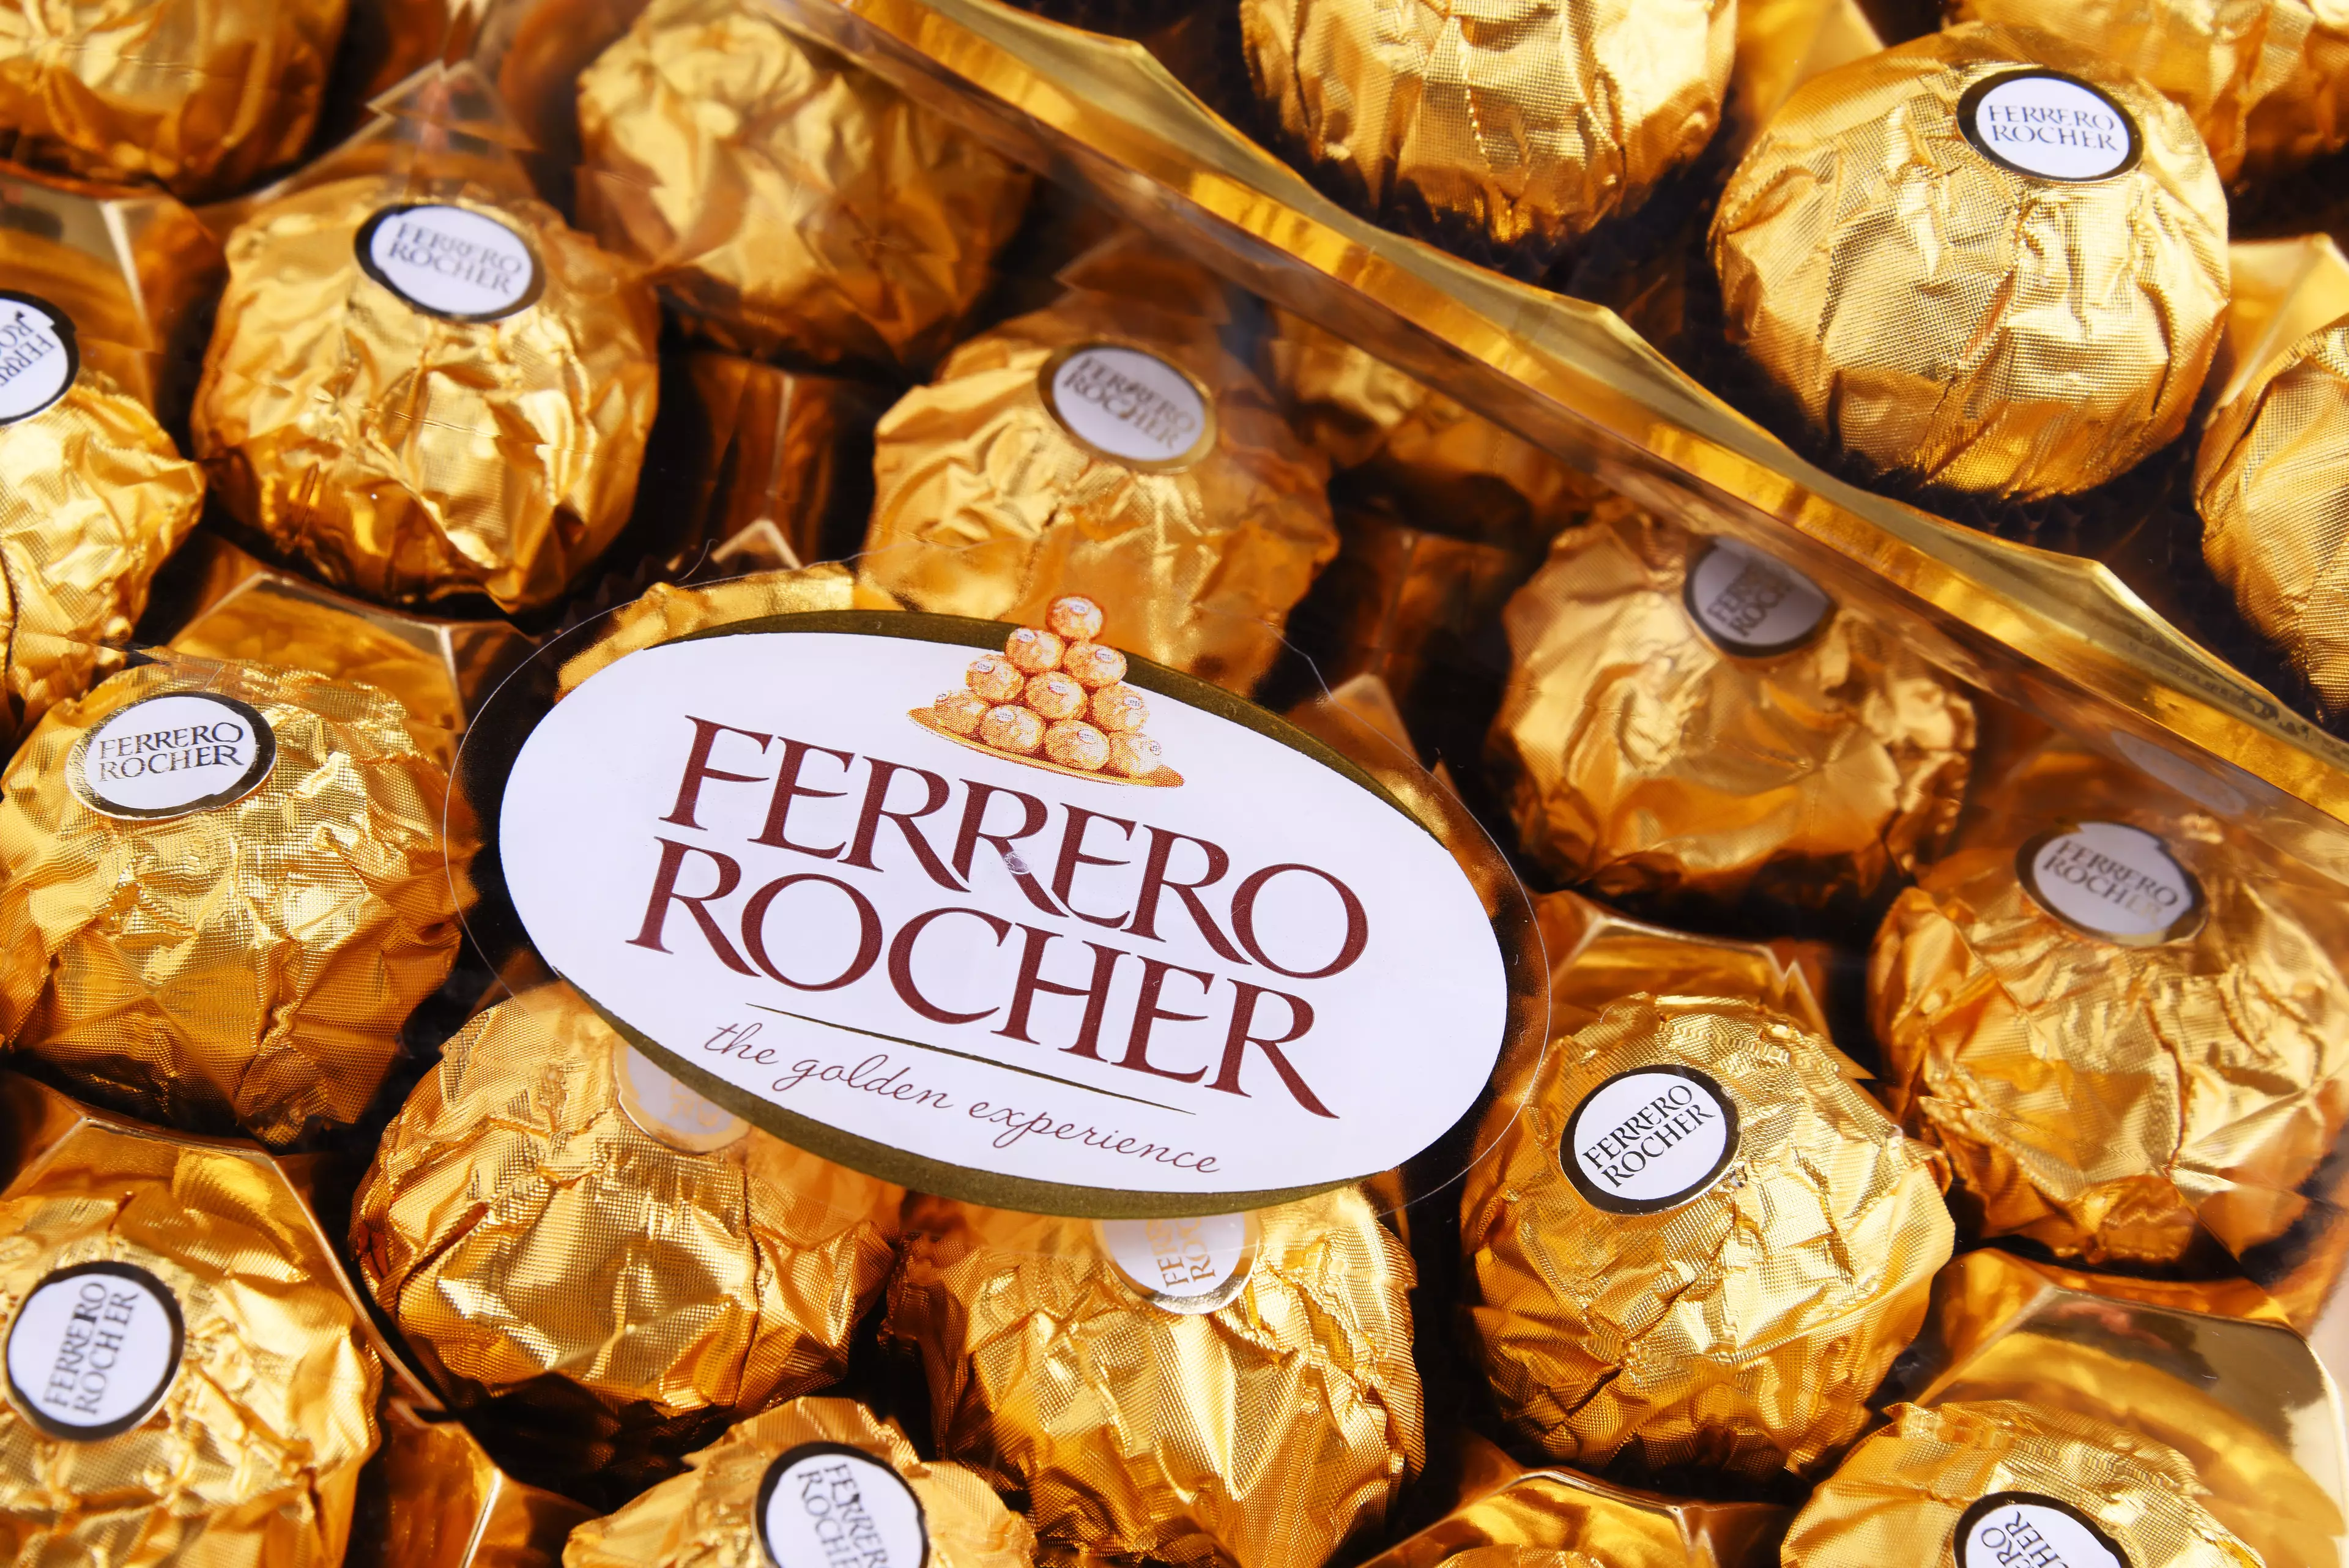 The company behind the Ferrero Rocher have launched a brand new chocolate bar (